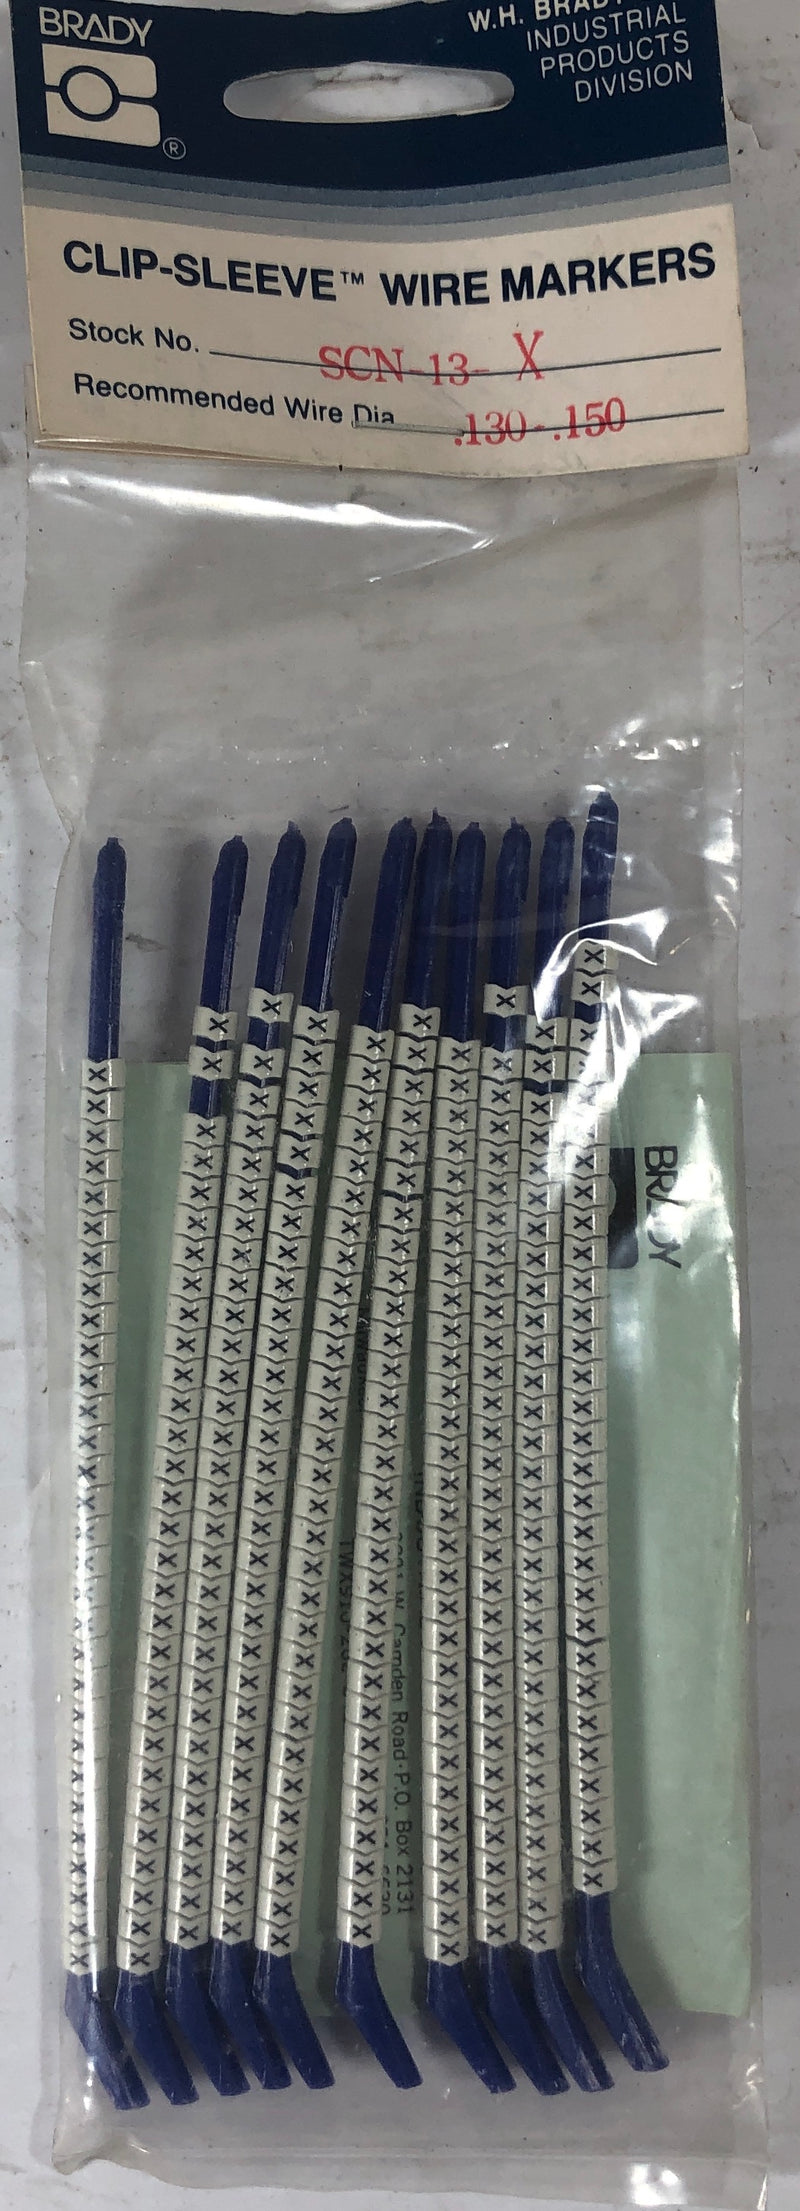 Brady Clip-Sleeve Wire Markers SCN13X